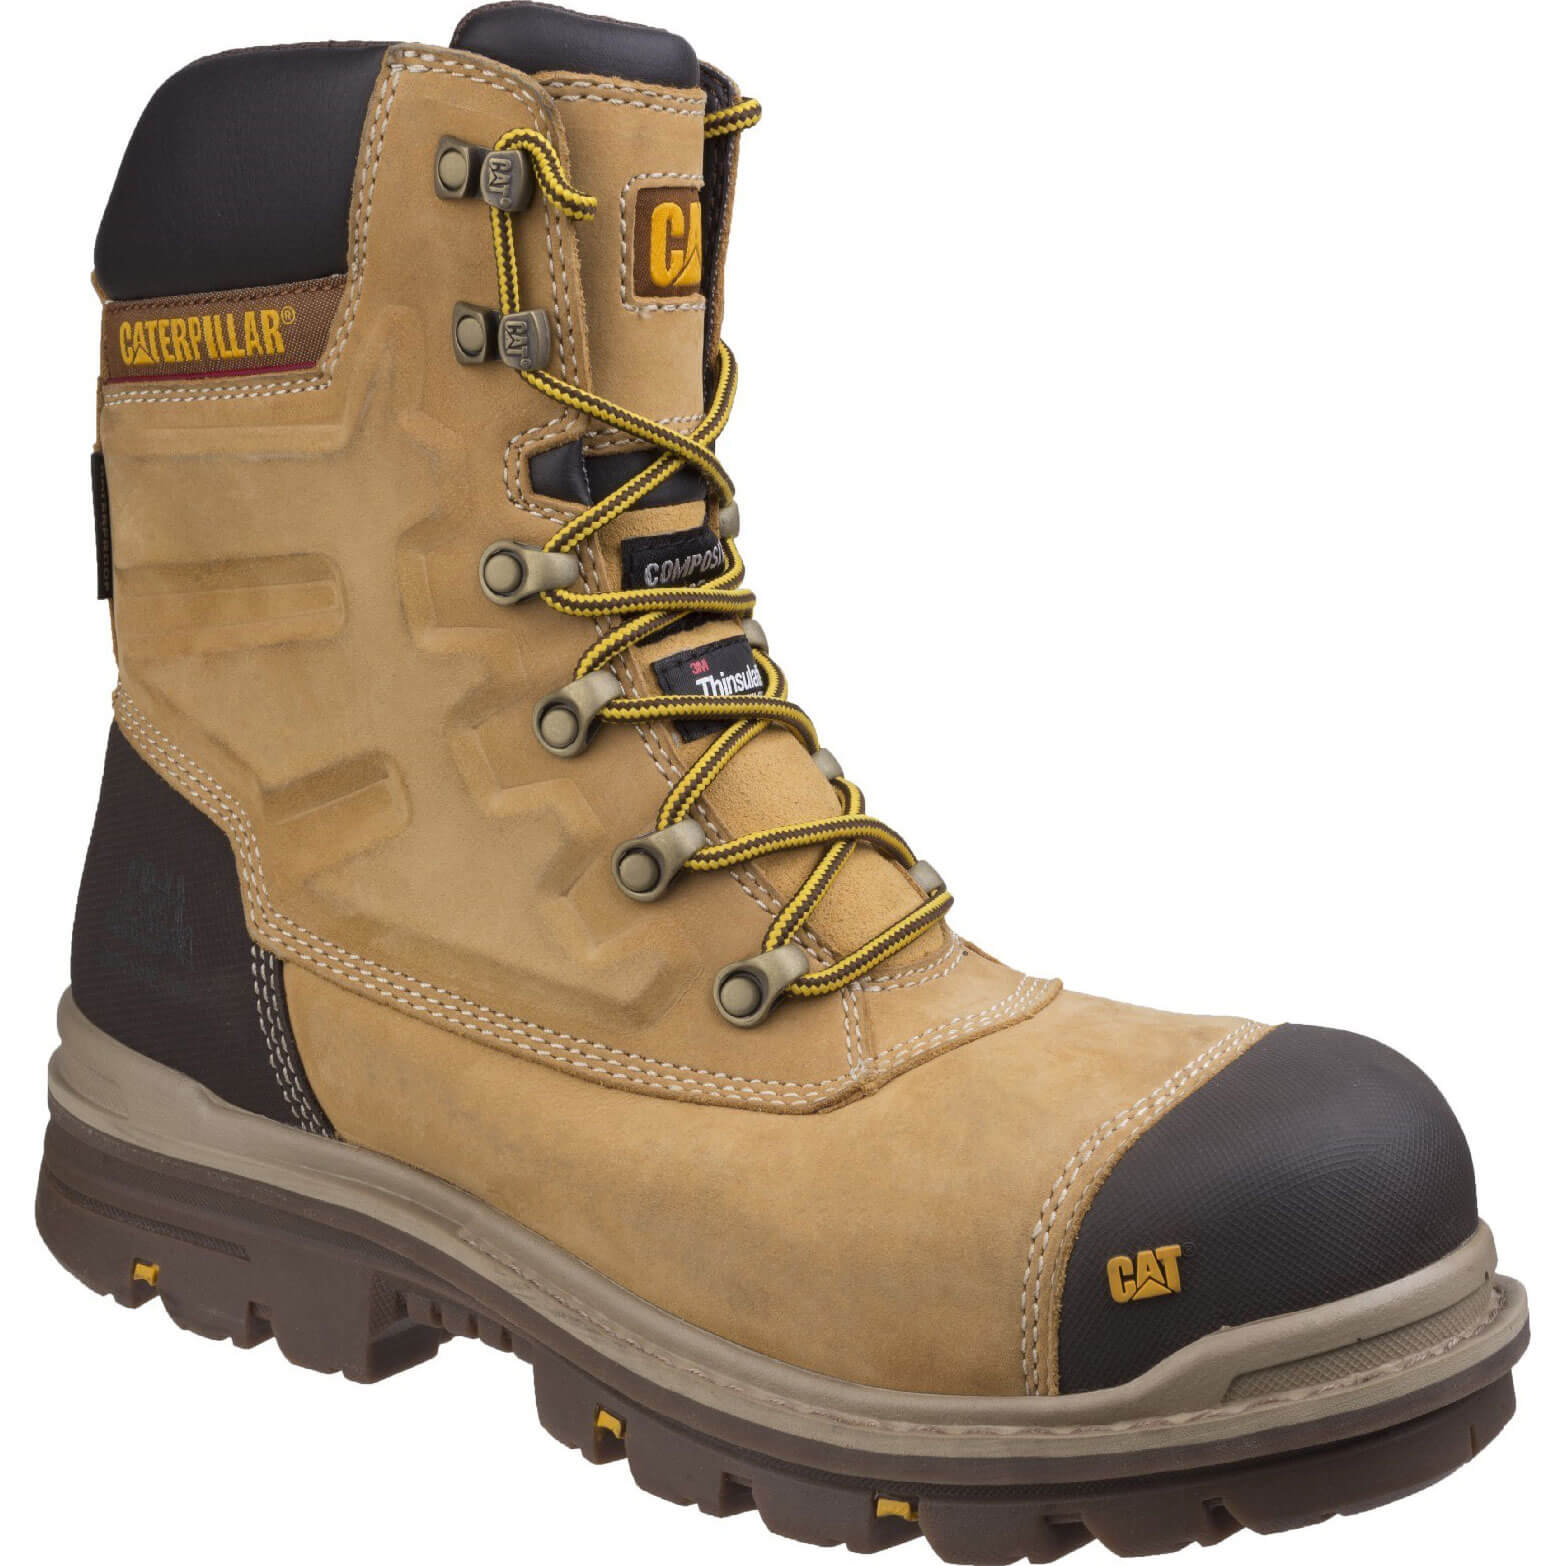 Image of Caterpillar Mens Premier Waterproof Safety Boots Honey Size 7